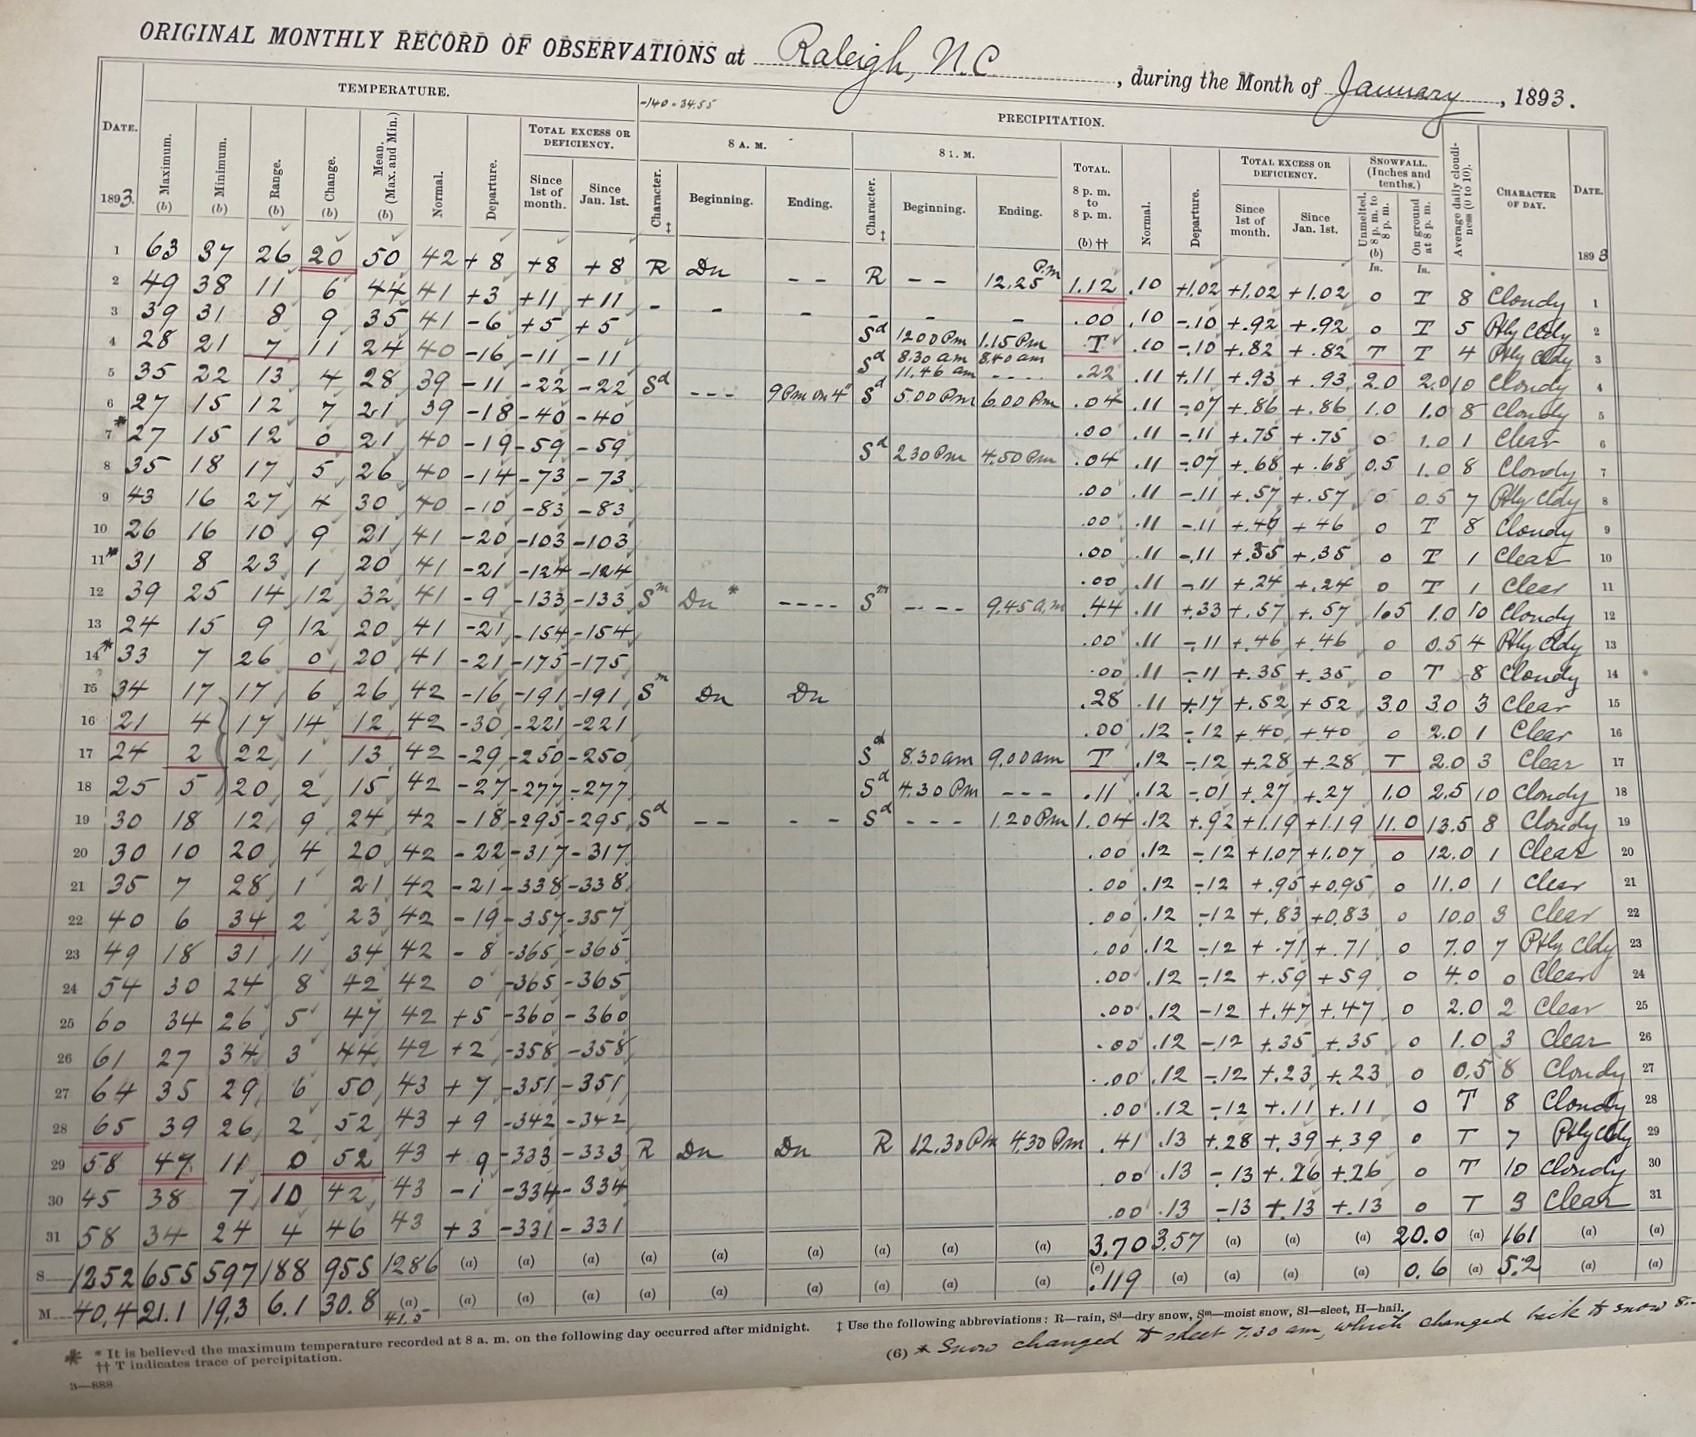 Summary of weather statistics for Raleigh, N.C., Jan. 1893 (From Weather Bureau Meteorological Reports Vol. 4)